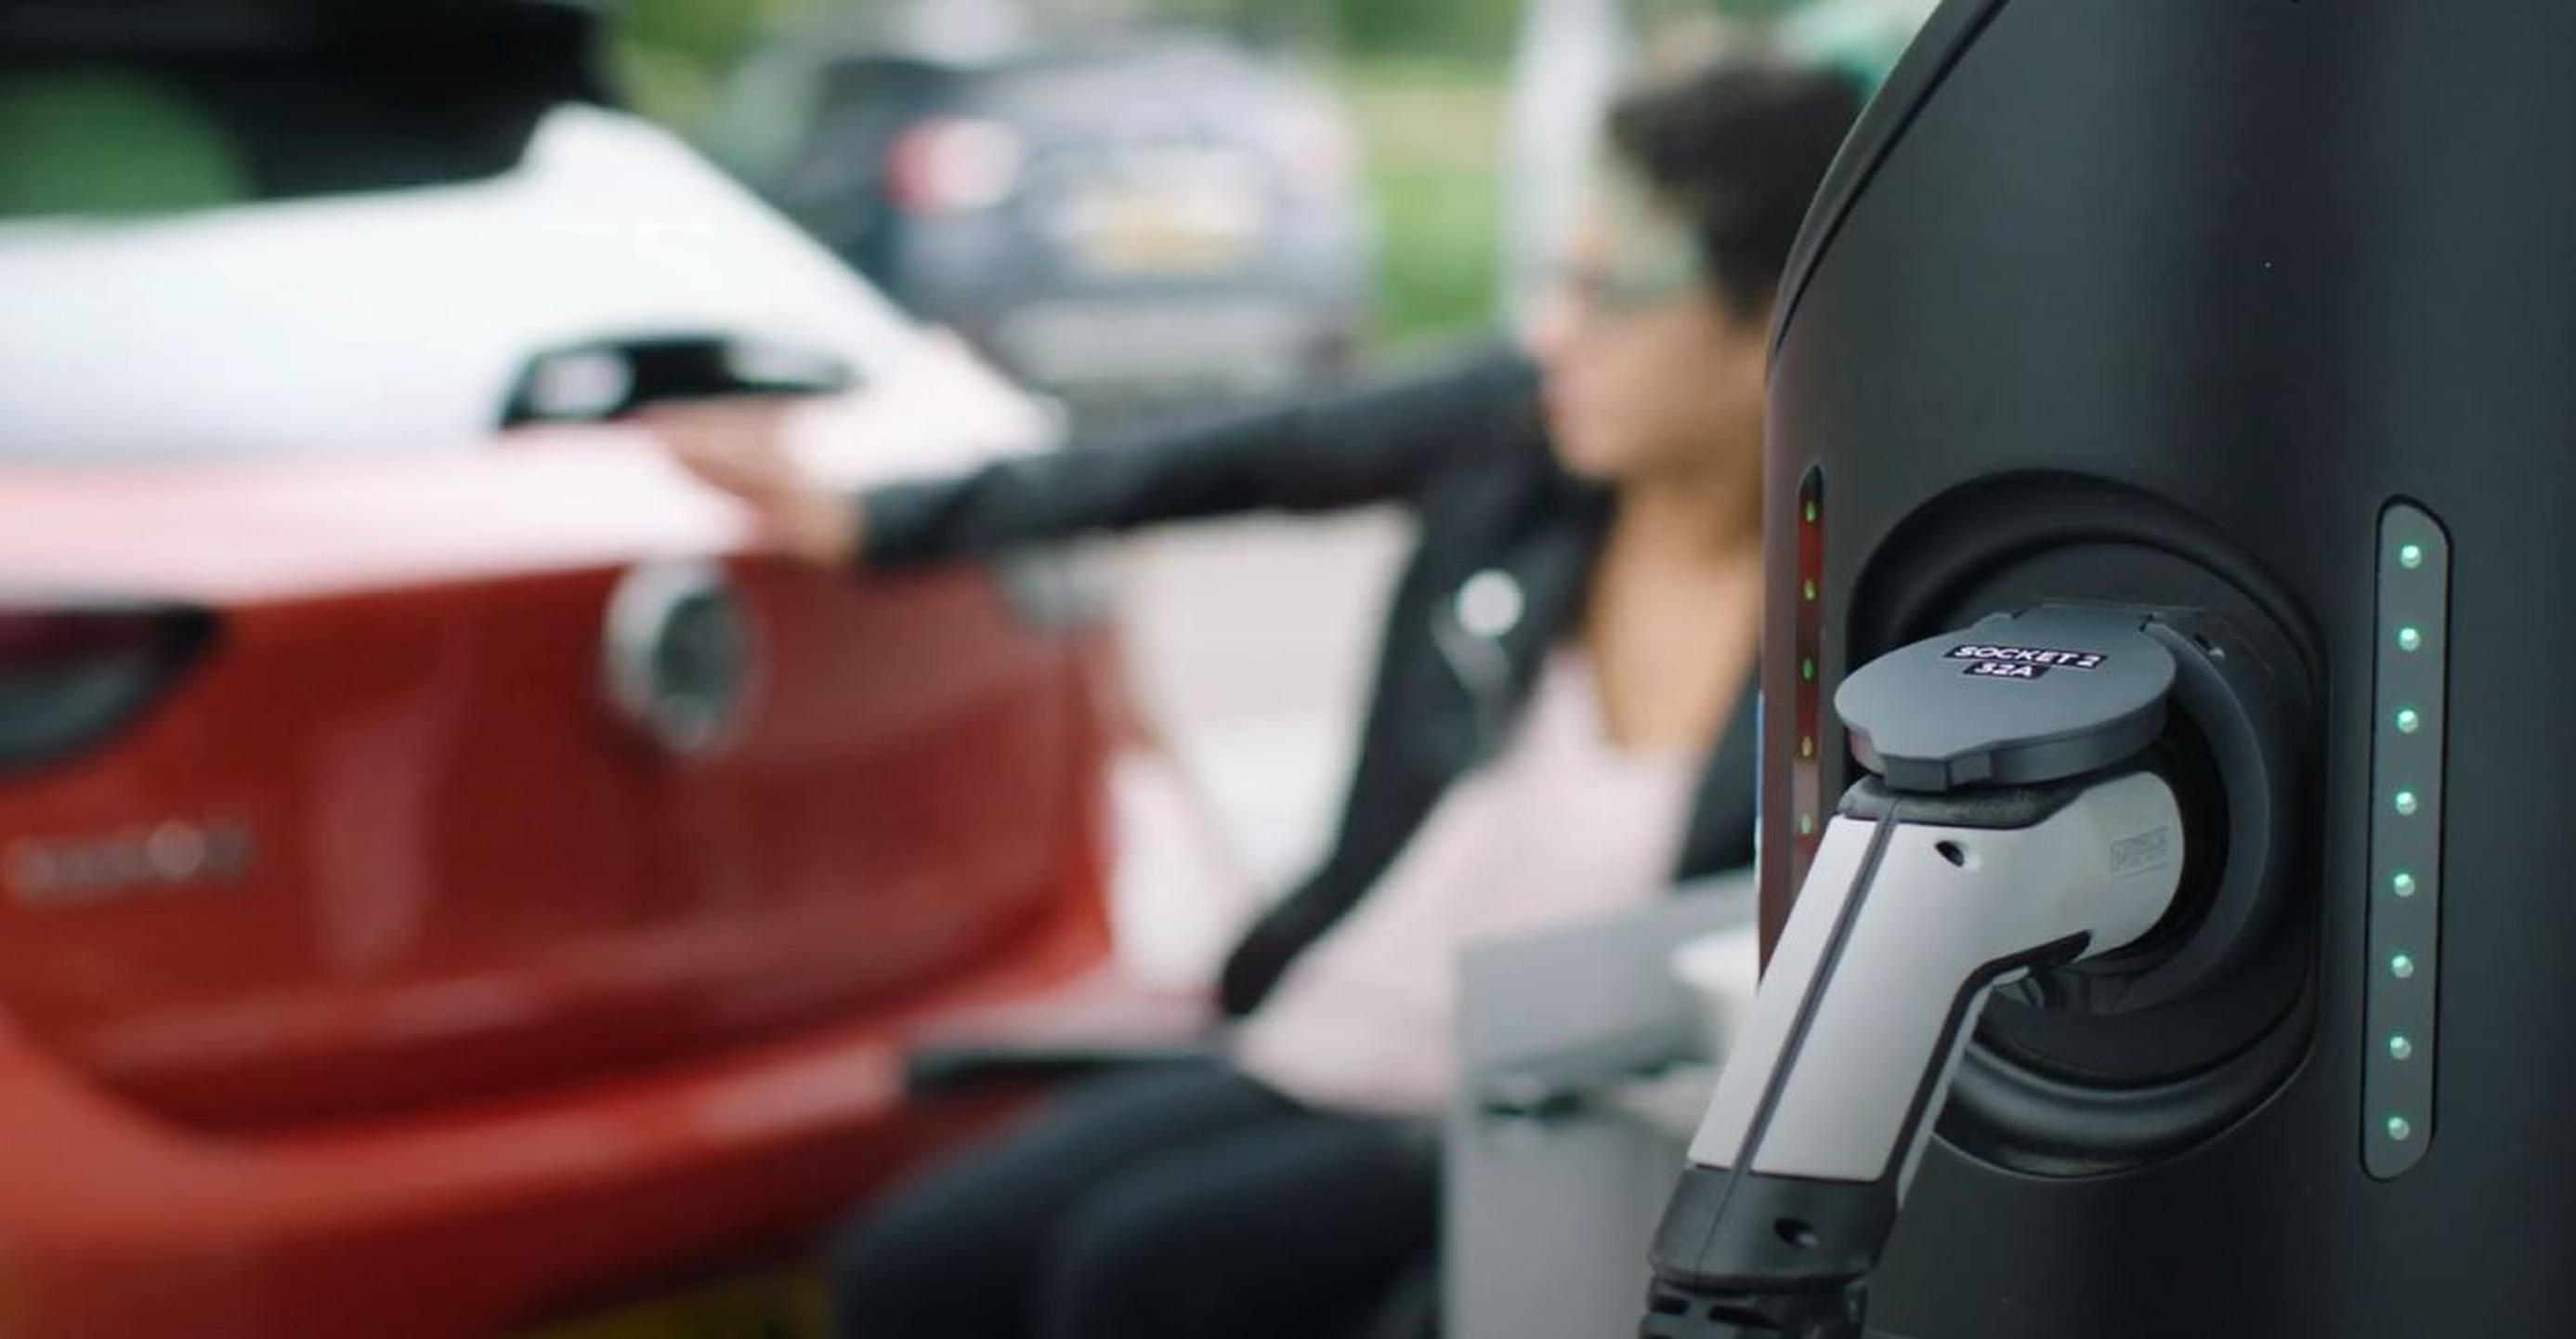 The new standard for accessible EV chargepoints is being The standard, which is sponsored by the charity Motability and the Office for Zero Emission Vehicles (OZEV)